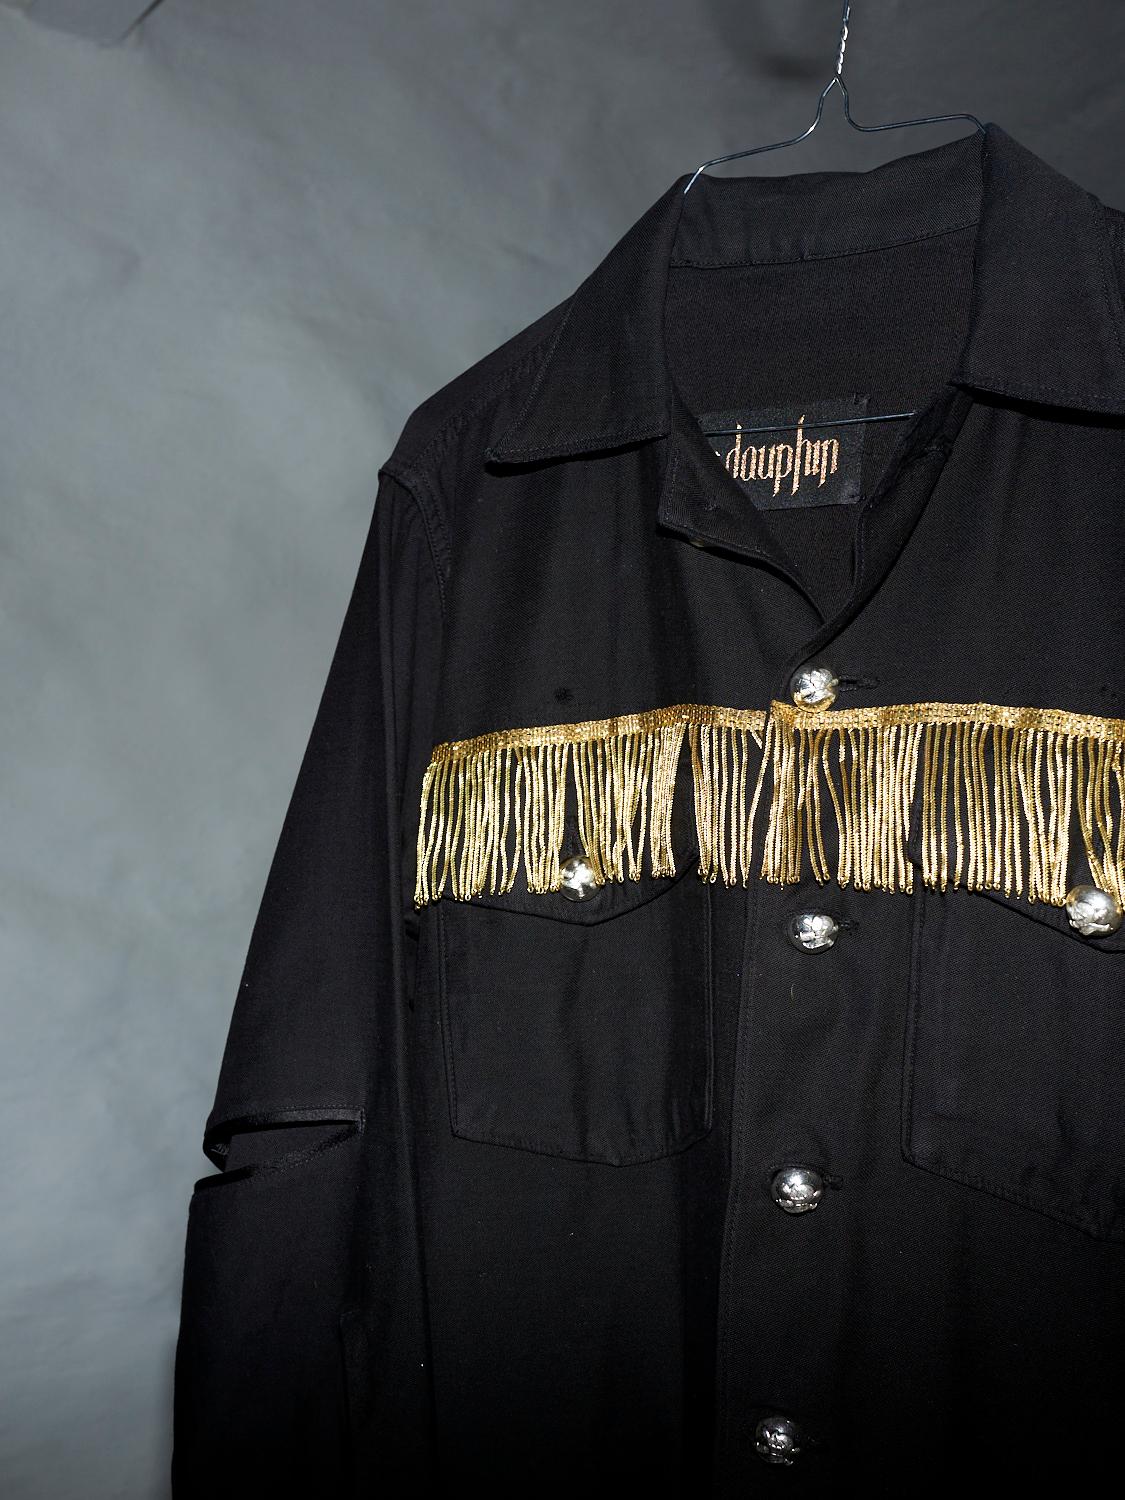 Embellished Repurposed Us Military Jacket from the 70's in 100% Cotton dyed Black, French Bullion Gold Fringe and Vintage Silver Tone Button in Brass with details of Black Duchesse 100% Silk 

Brand: J Dauphin
Size: S/M
Sustainable Luxury,